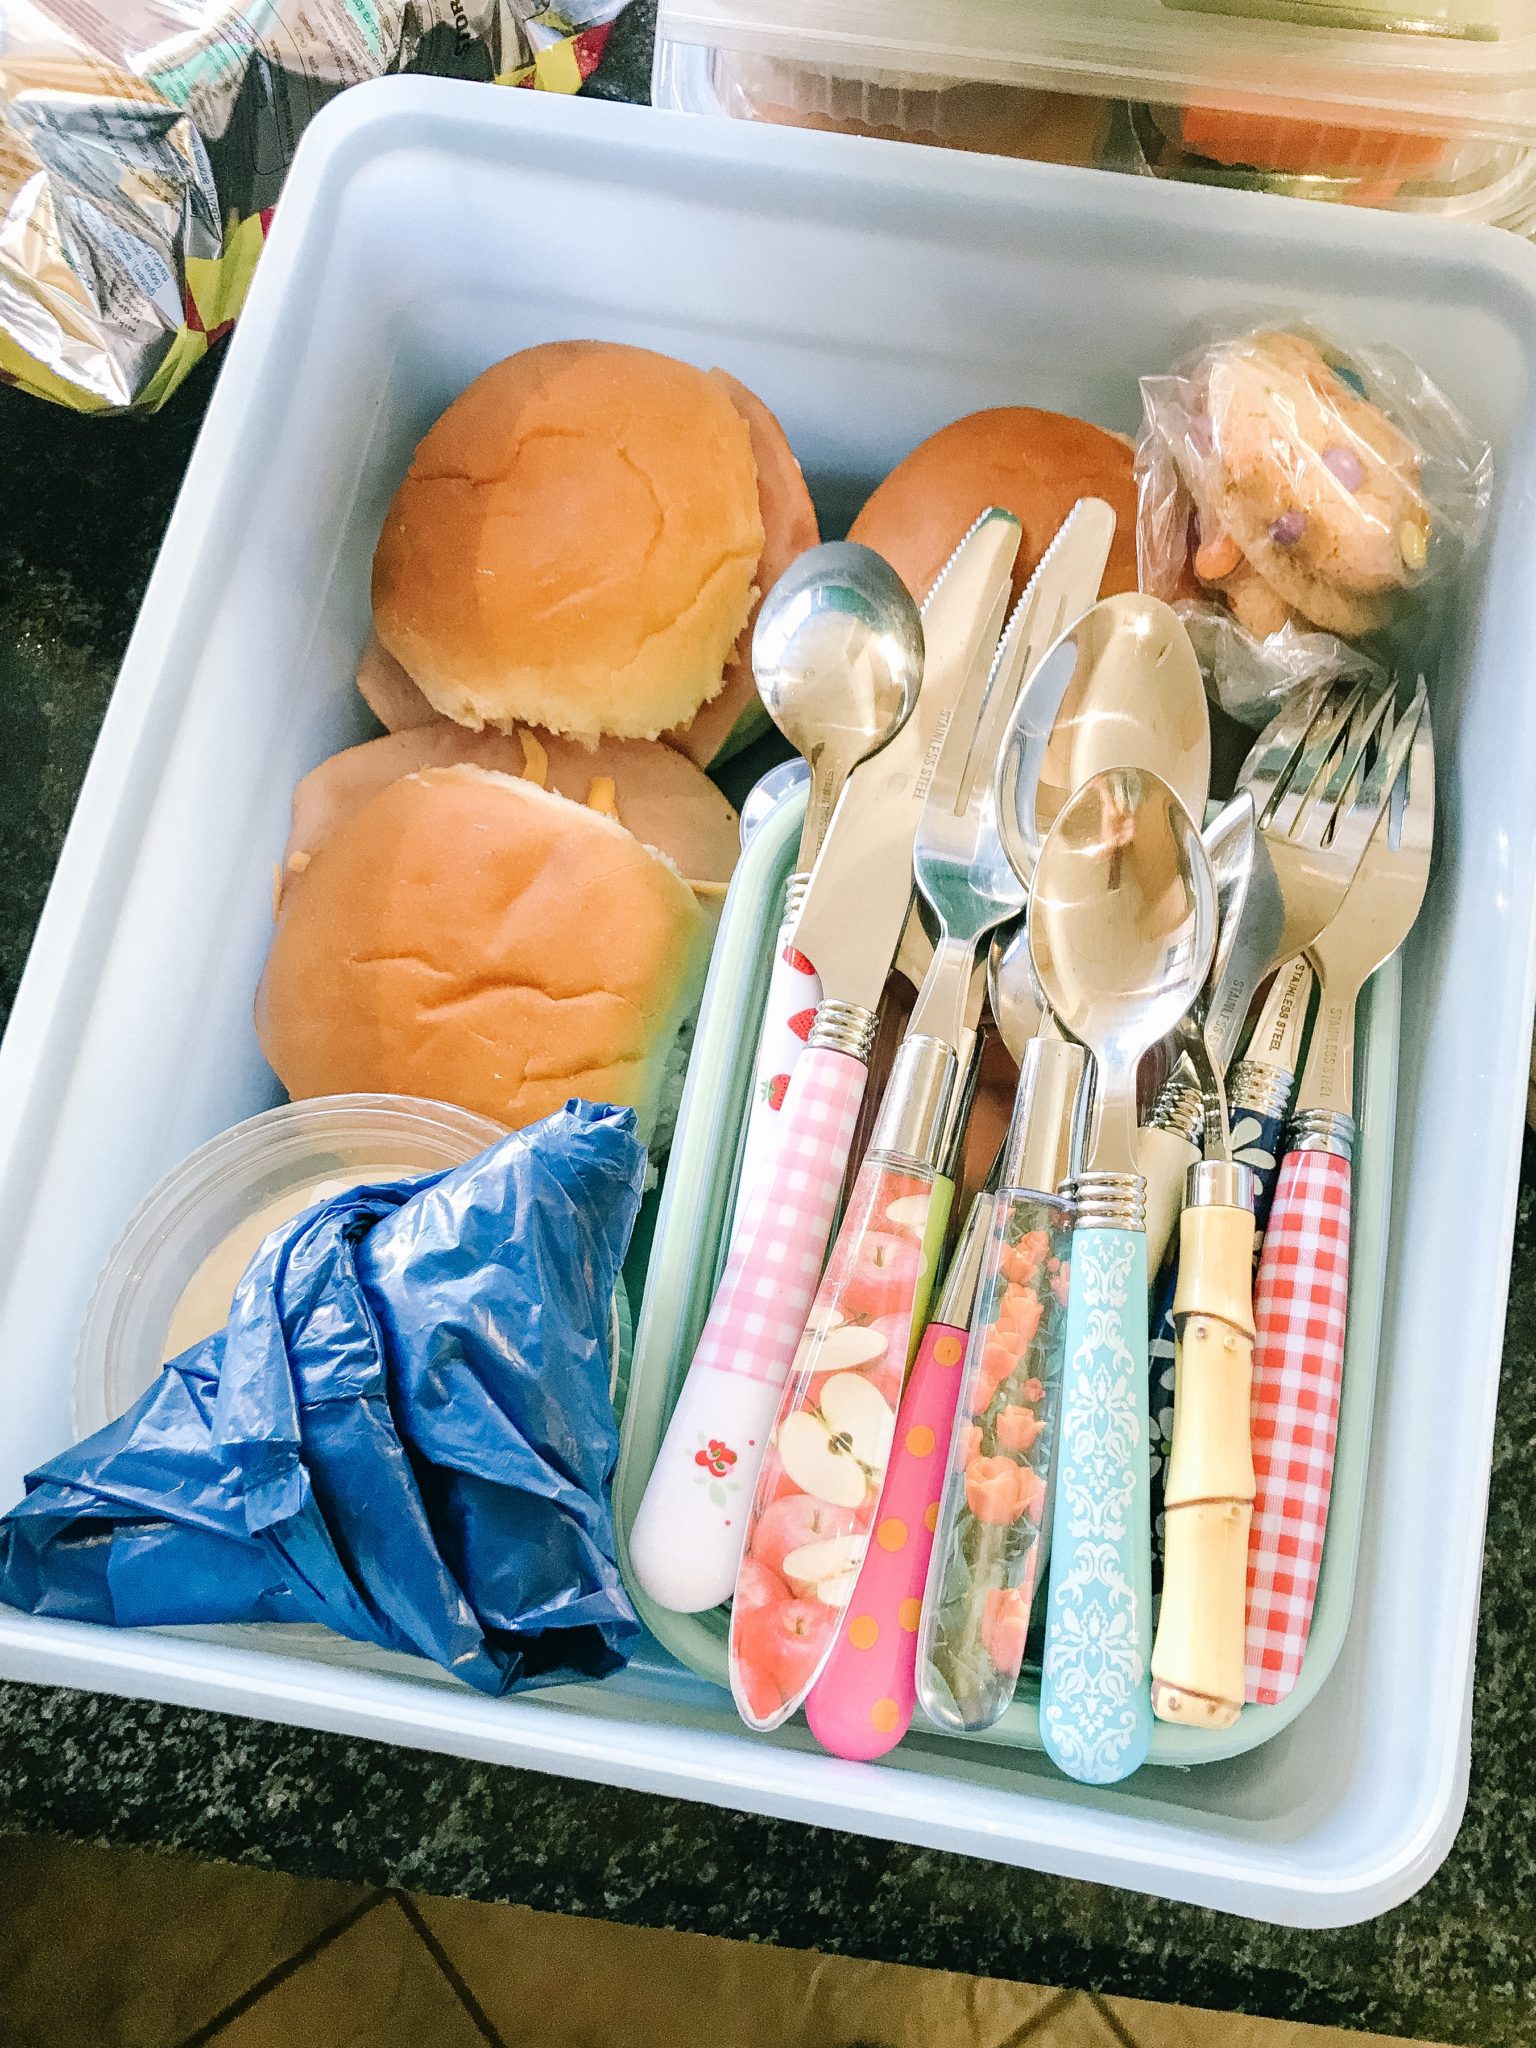 Don't forget the cutlery for your picnic!